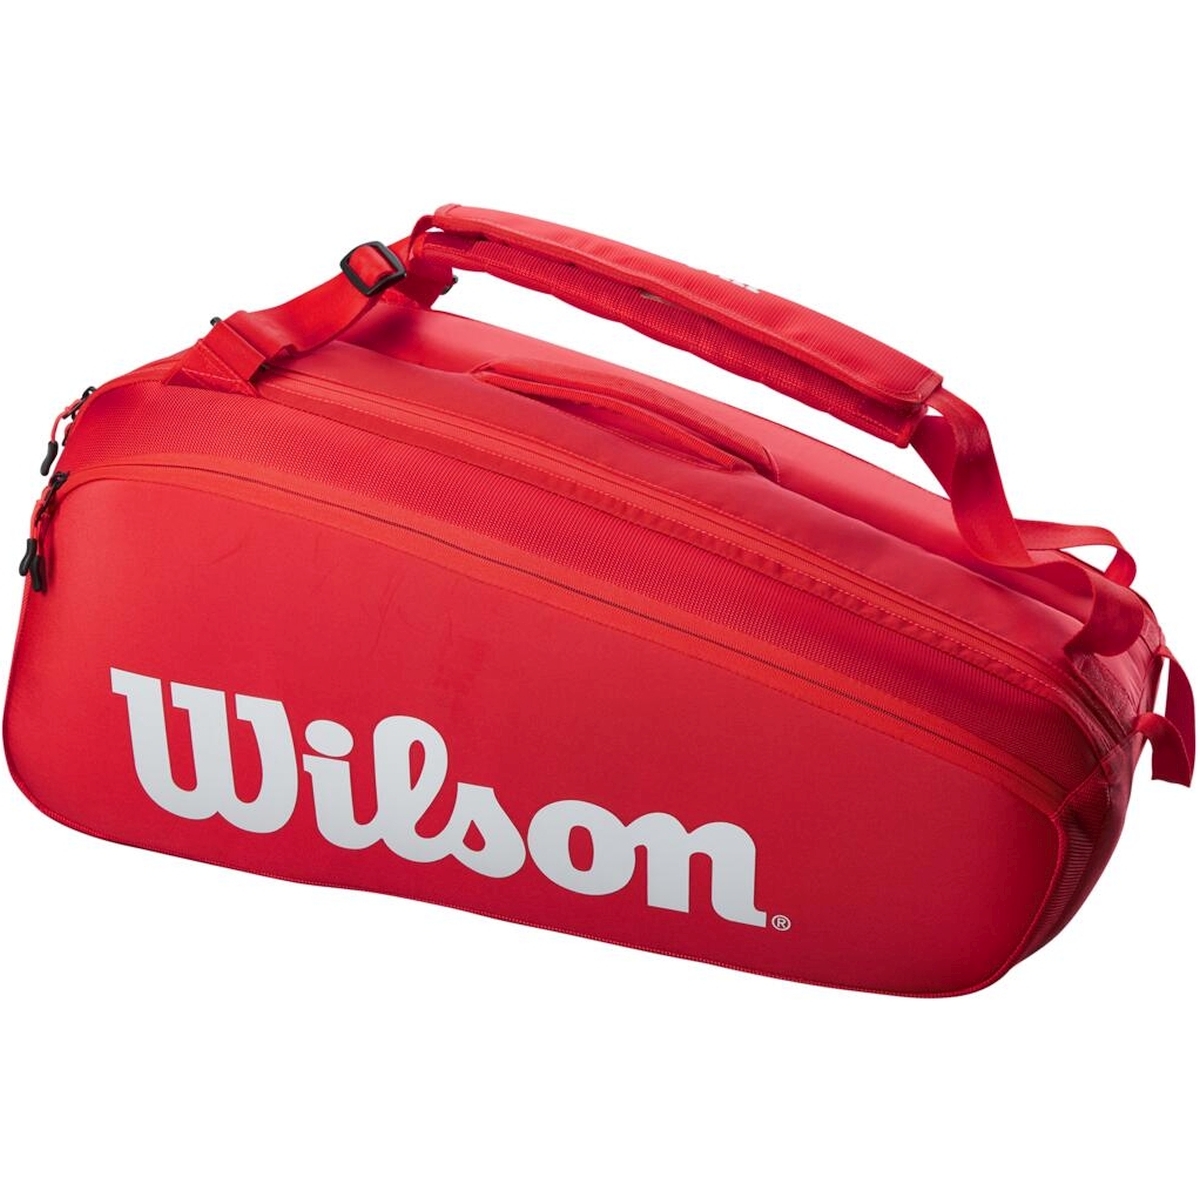 wilson super tour 9 pack red bag